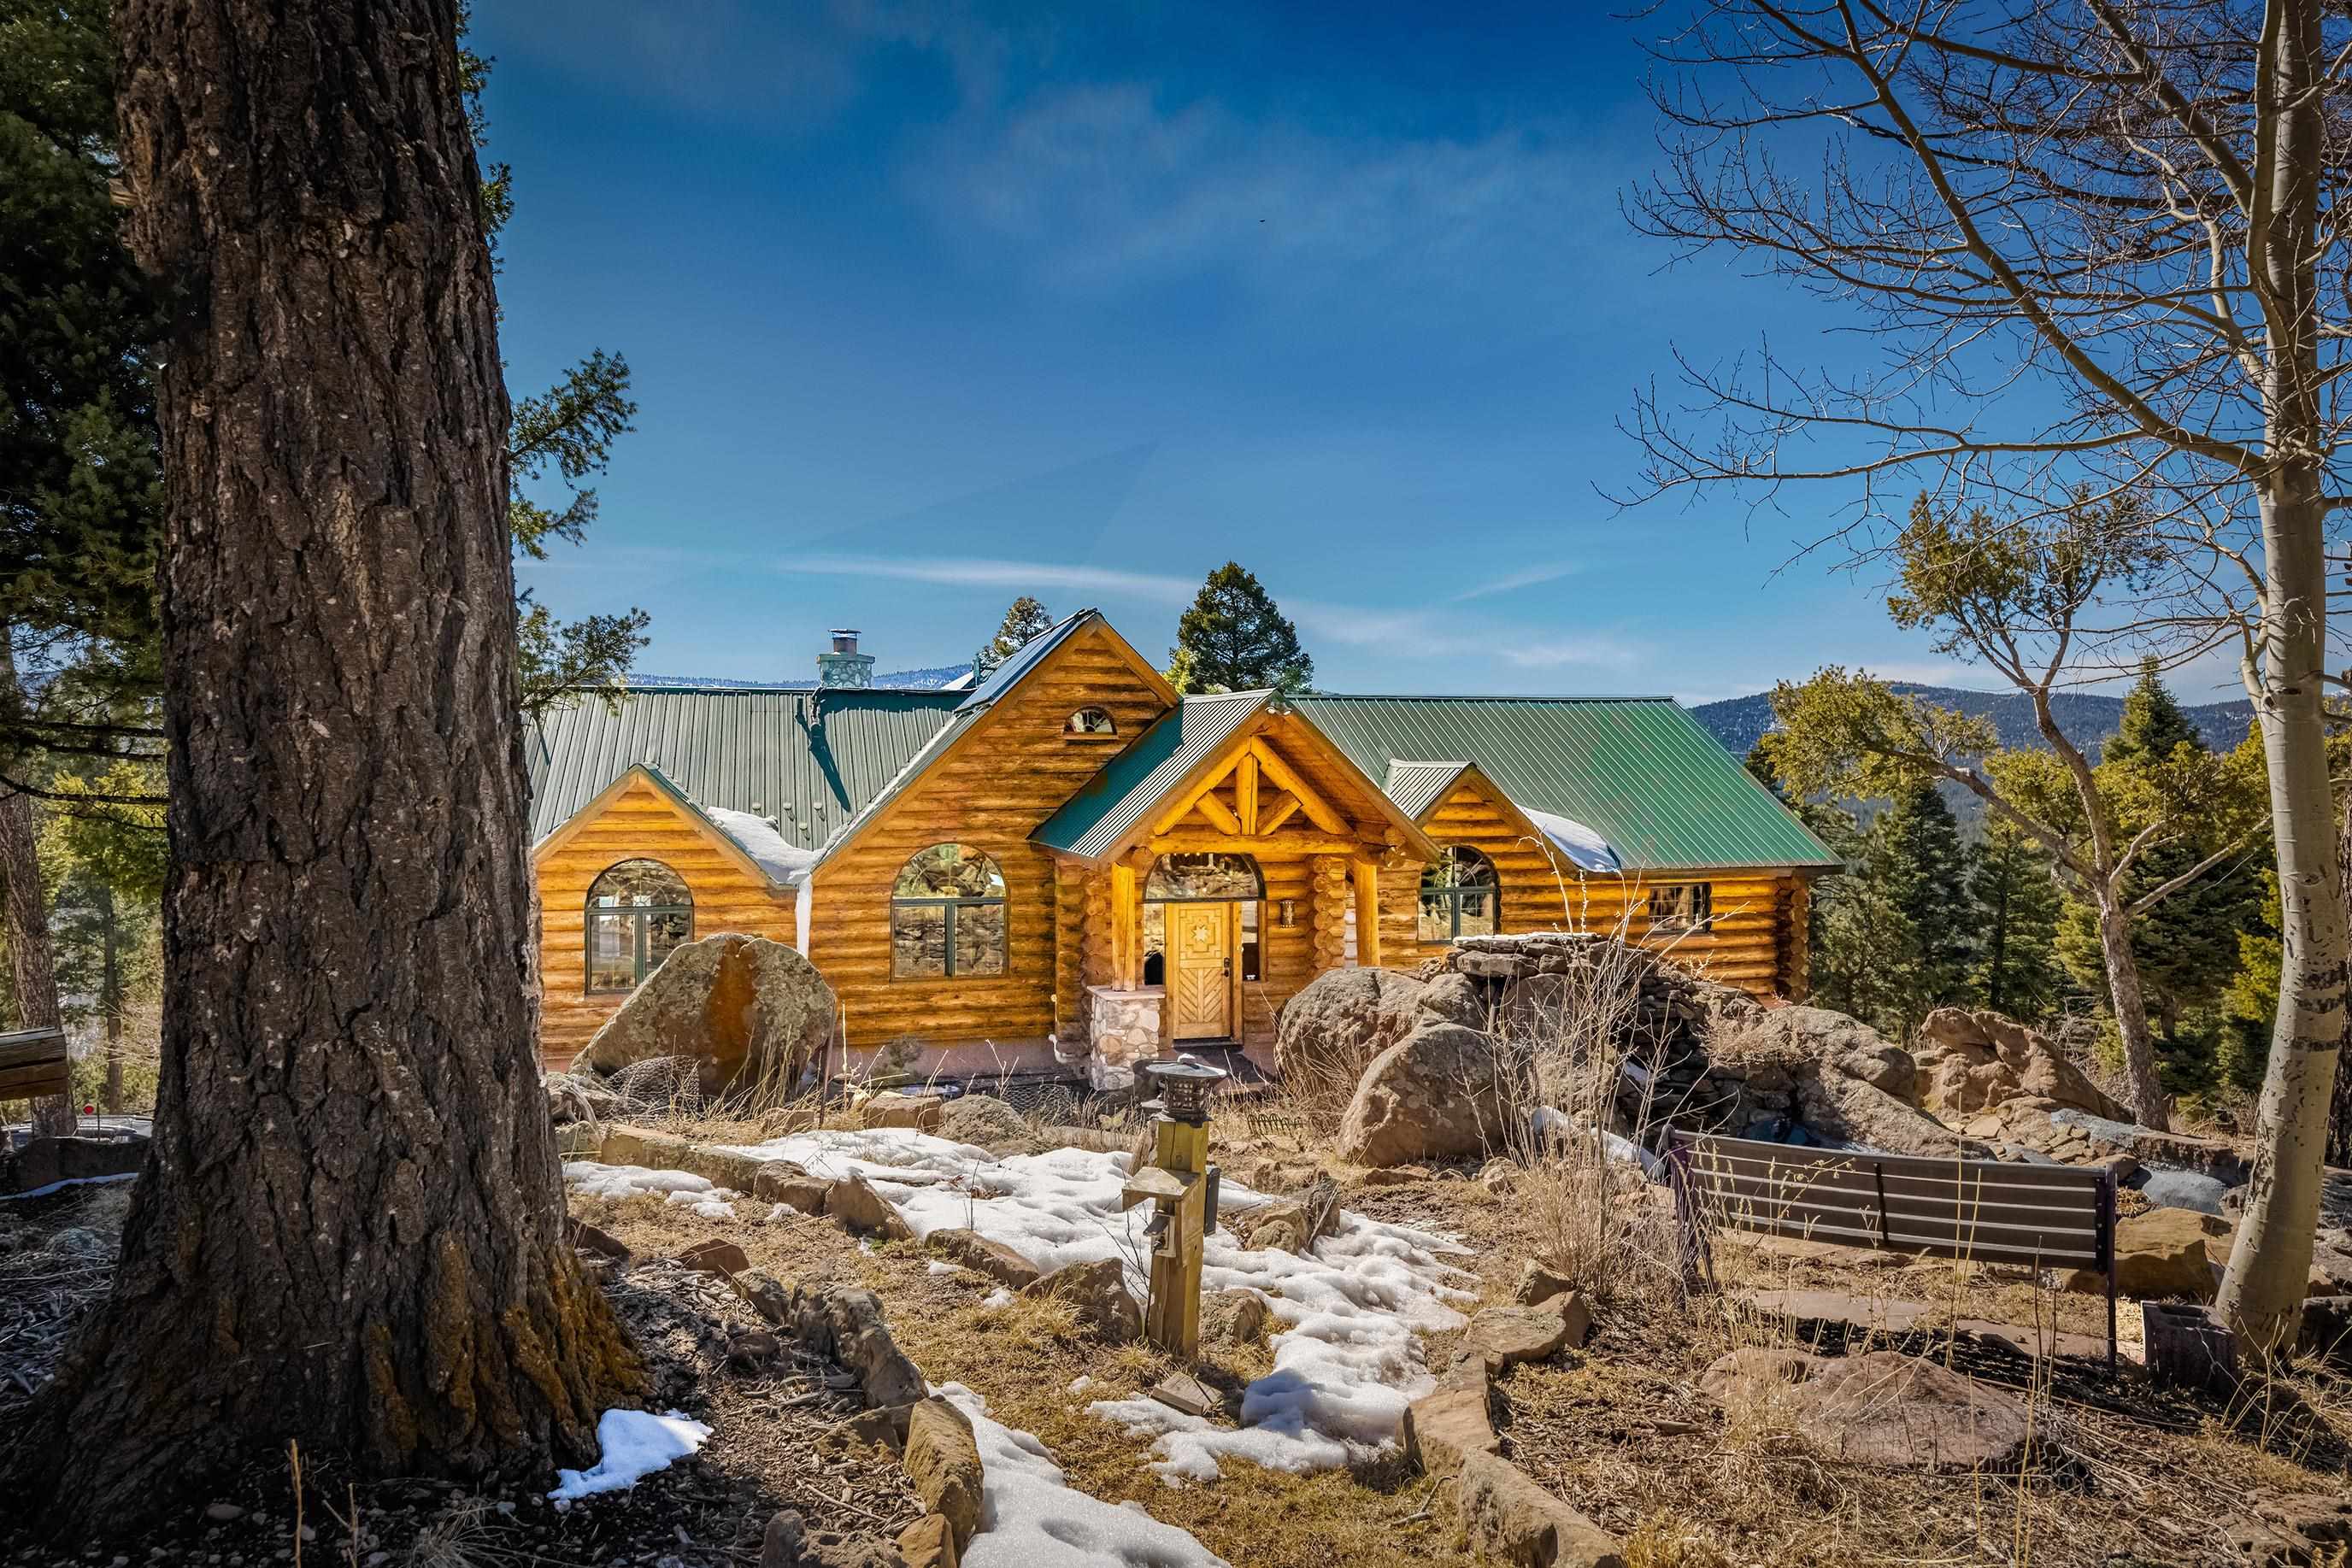 Luxury Log Cabin with Amazing Valley Views! This beautiful custom home is located at the end of cul-de-sac conveniently bordered by 144 acres of designated greenbelt but still just minutes from the the ski mountain. As you enter the home you will notice the soaring viga ceilings and the clean tiles laid throughout. A great open floor plan plus a built in wet bar and pool table make for a perfect hosting area. There is also a wall of Pella windows revealing spectacular views of Wheeler Peak and beyond. The kitchen is complete with granite countertops and a custom designed island. There is a separated dining area accented with decorative wooden beams. The master bedroom features a gas kiva fireplace and private entrance to the deck containing a large hot tub as well as dramatic latilla and viga ceilings. Downstairs contains an extra living area, a mini kitchen and two more bedrooms. Bonus features include fiber-optic internet, solar panels and a fully paved driveway for added convenience and efficiency.